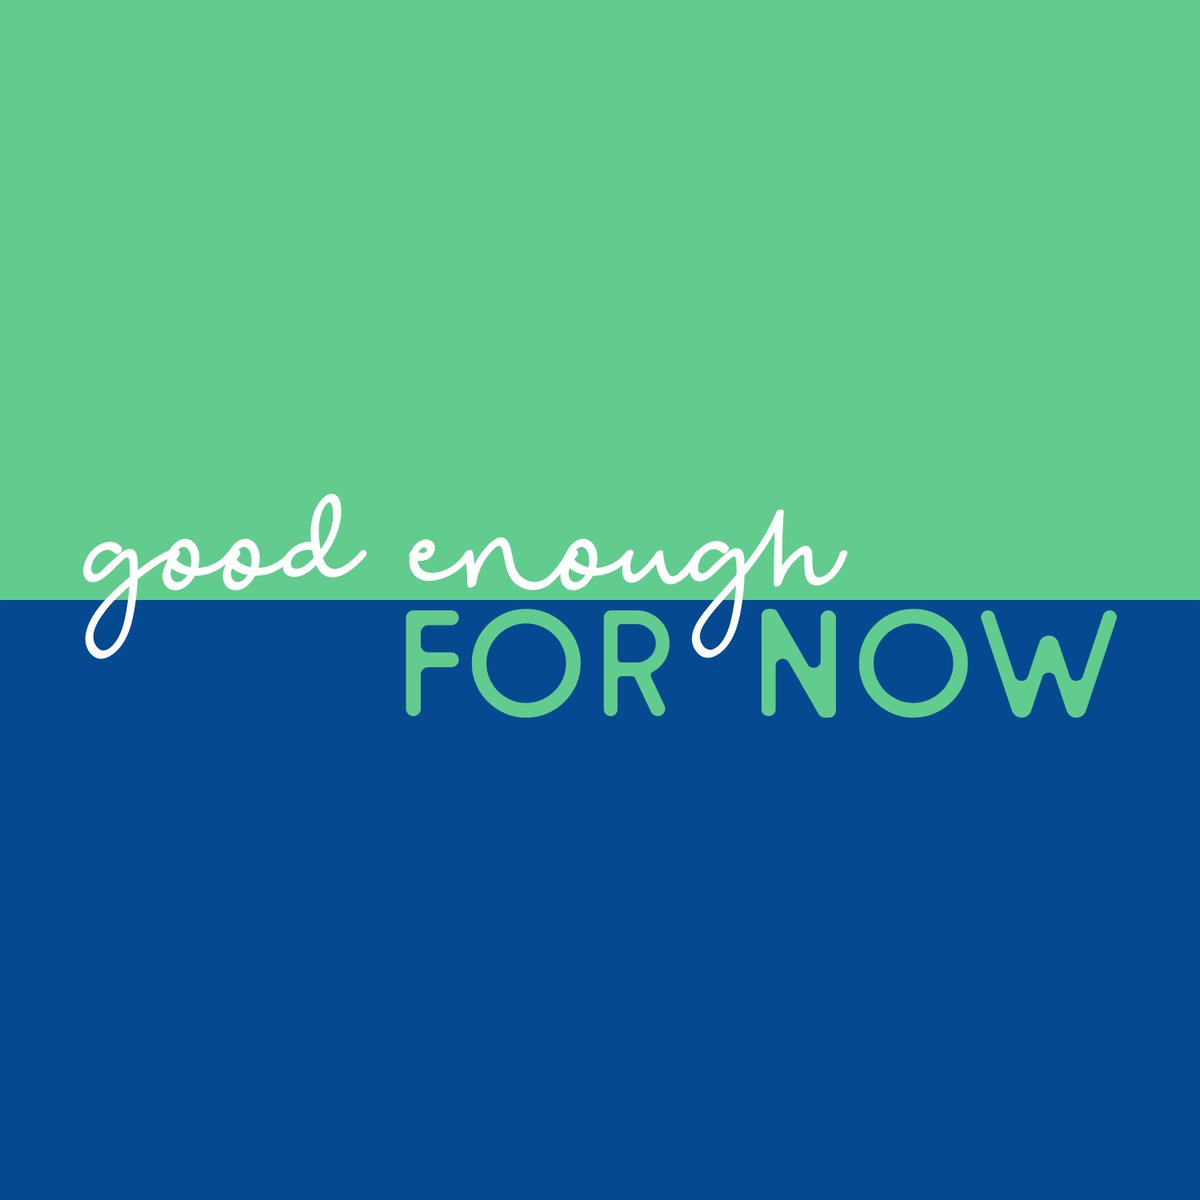 The Good Enough For Now podcast trailer is now LIVE! Follow on Apple Podcasts to listen and subscribe to get new episodes beginning next Tuesday, September 6th @GEFNpod @skunfinished #newpodcast #podcasttrailer podcasts.apple.com/us/podcast/goo…